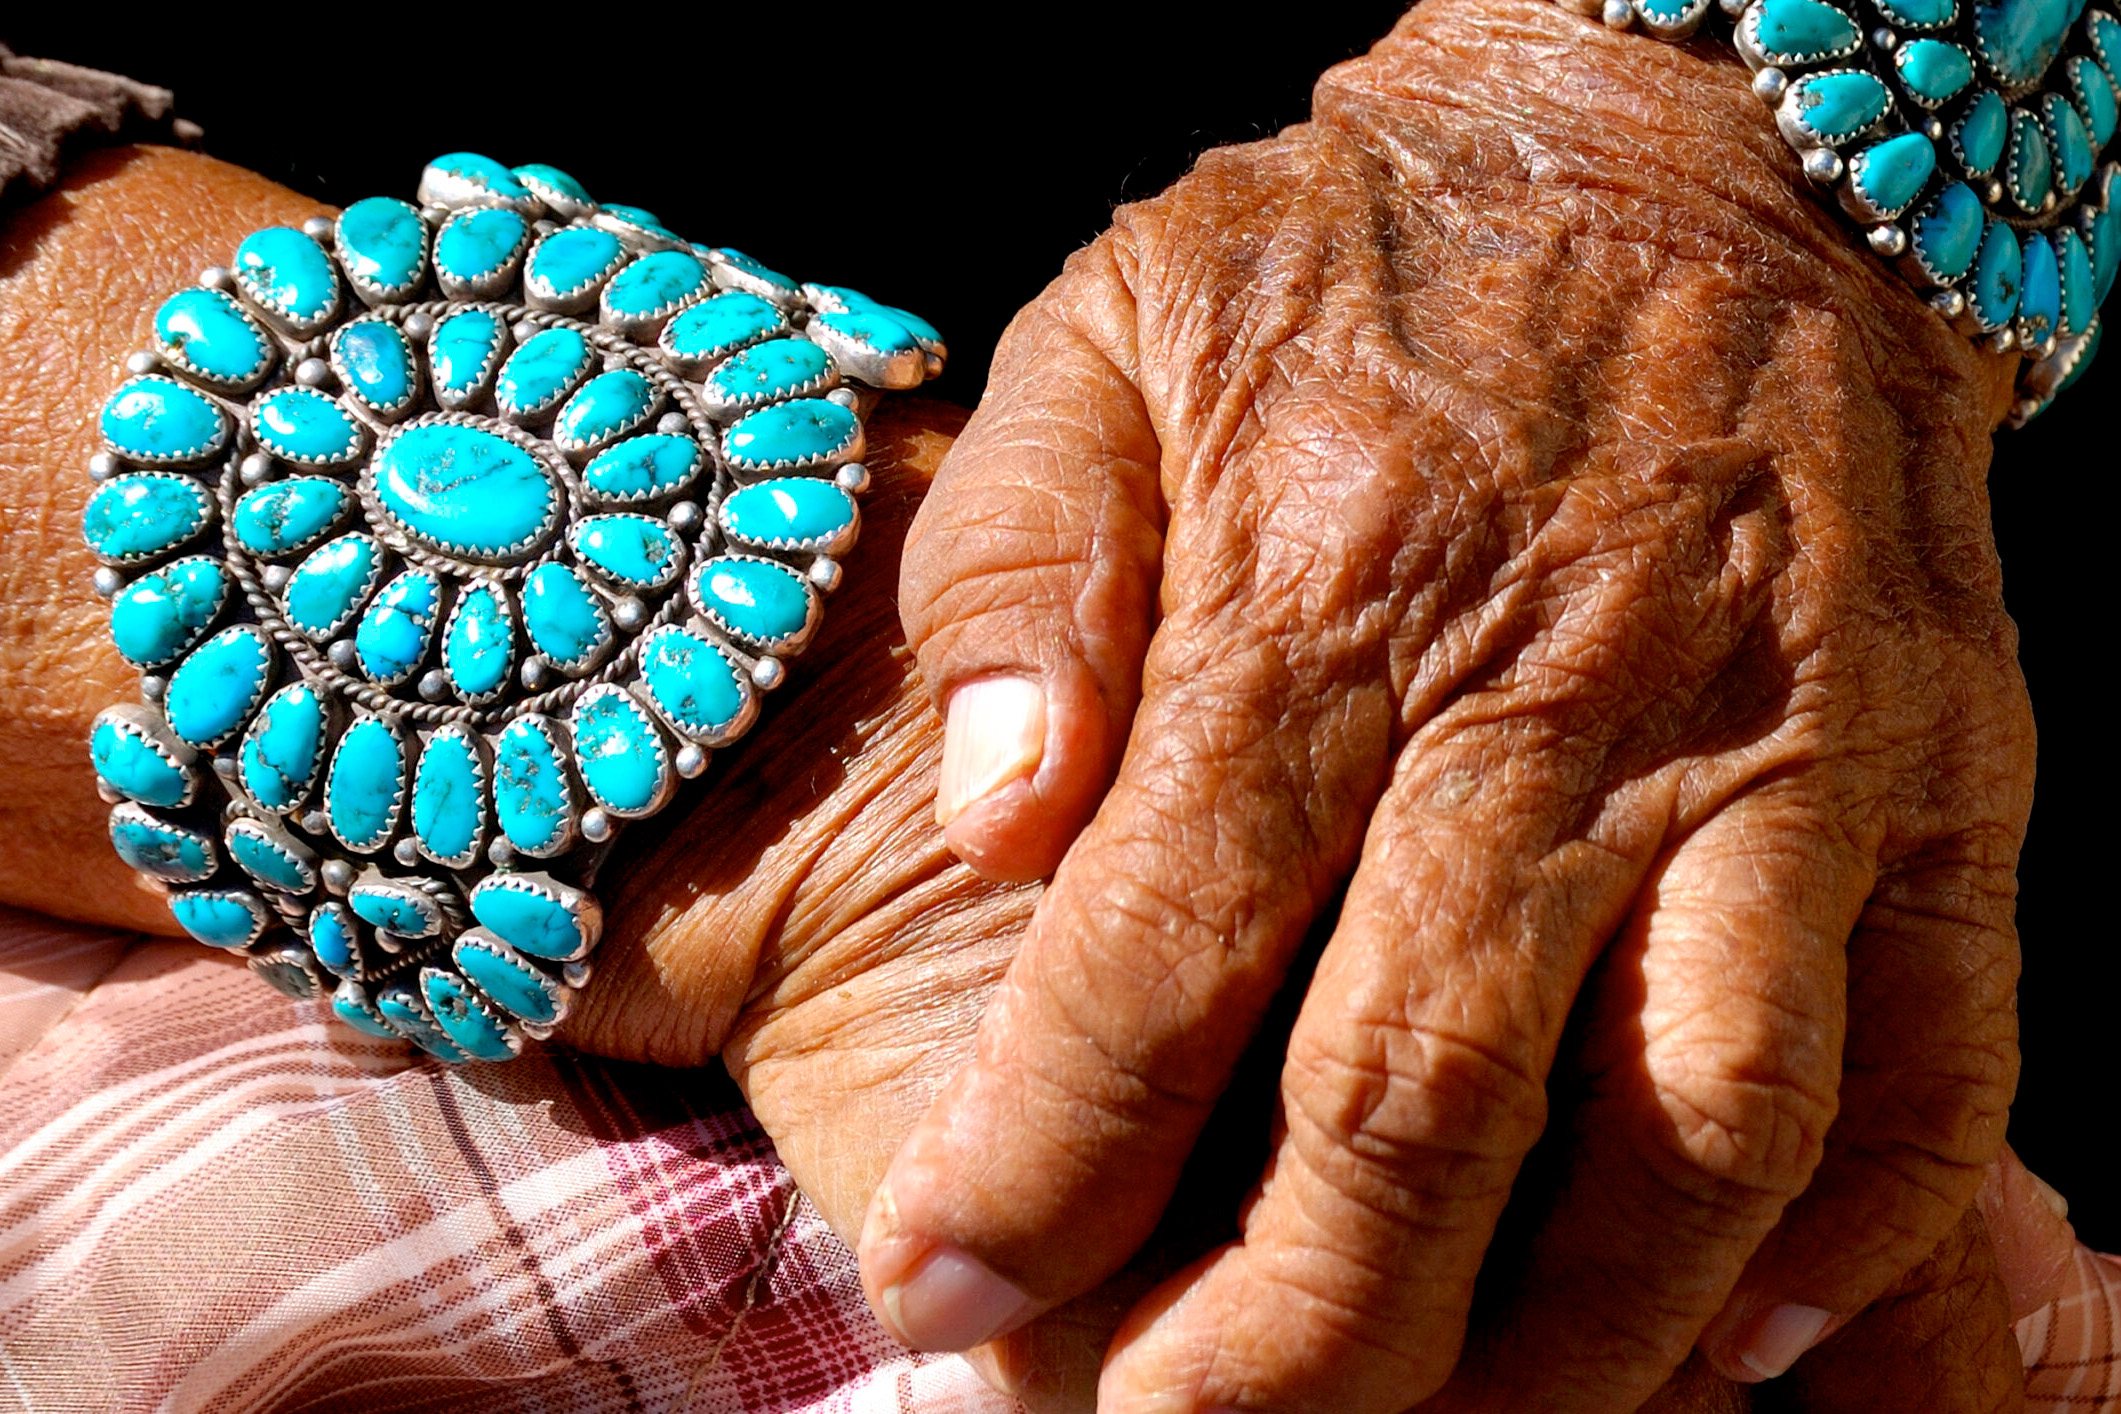 old hands wearing turquoise